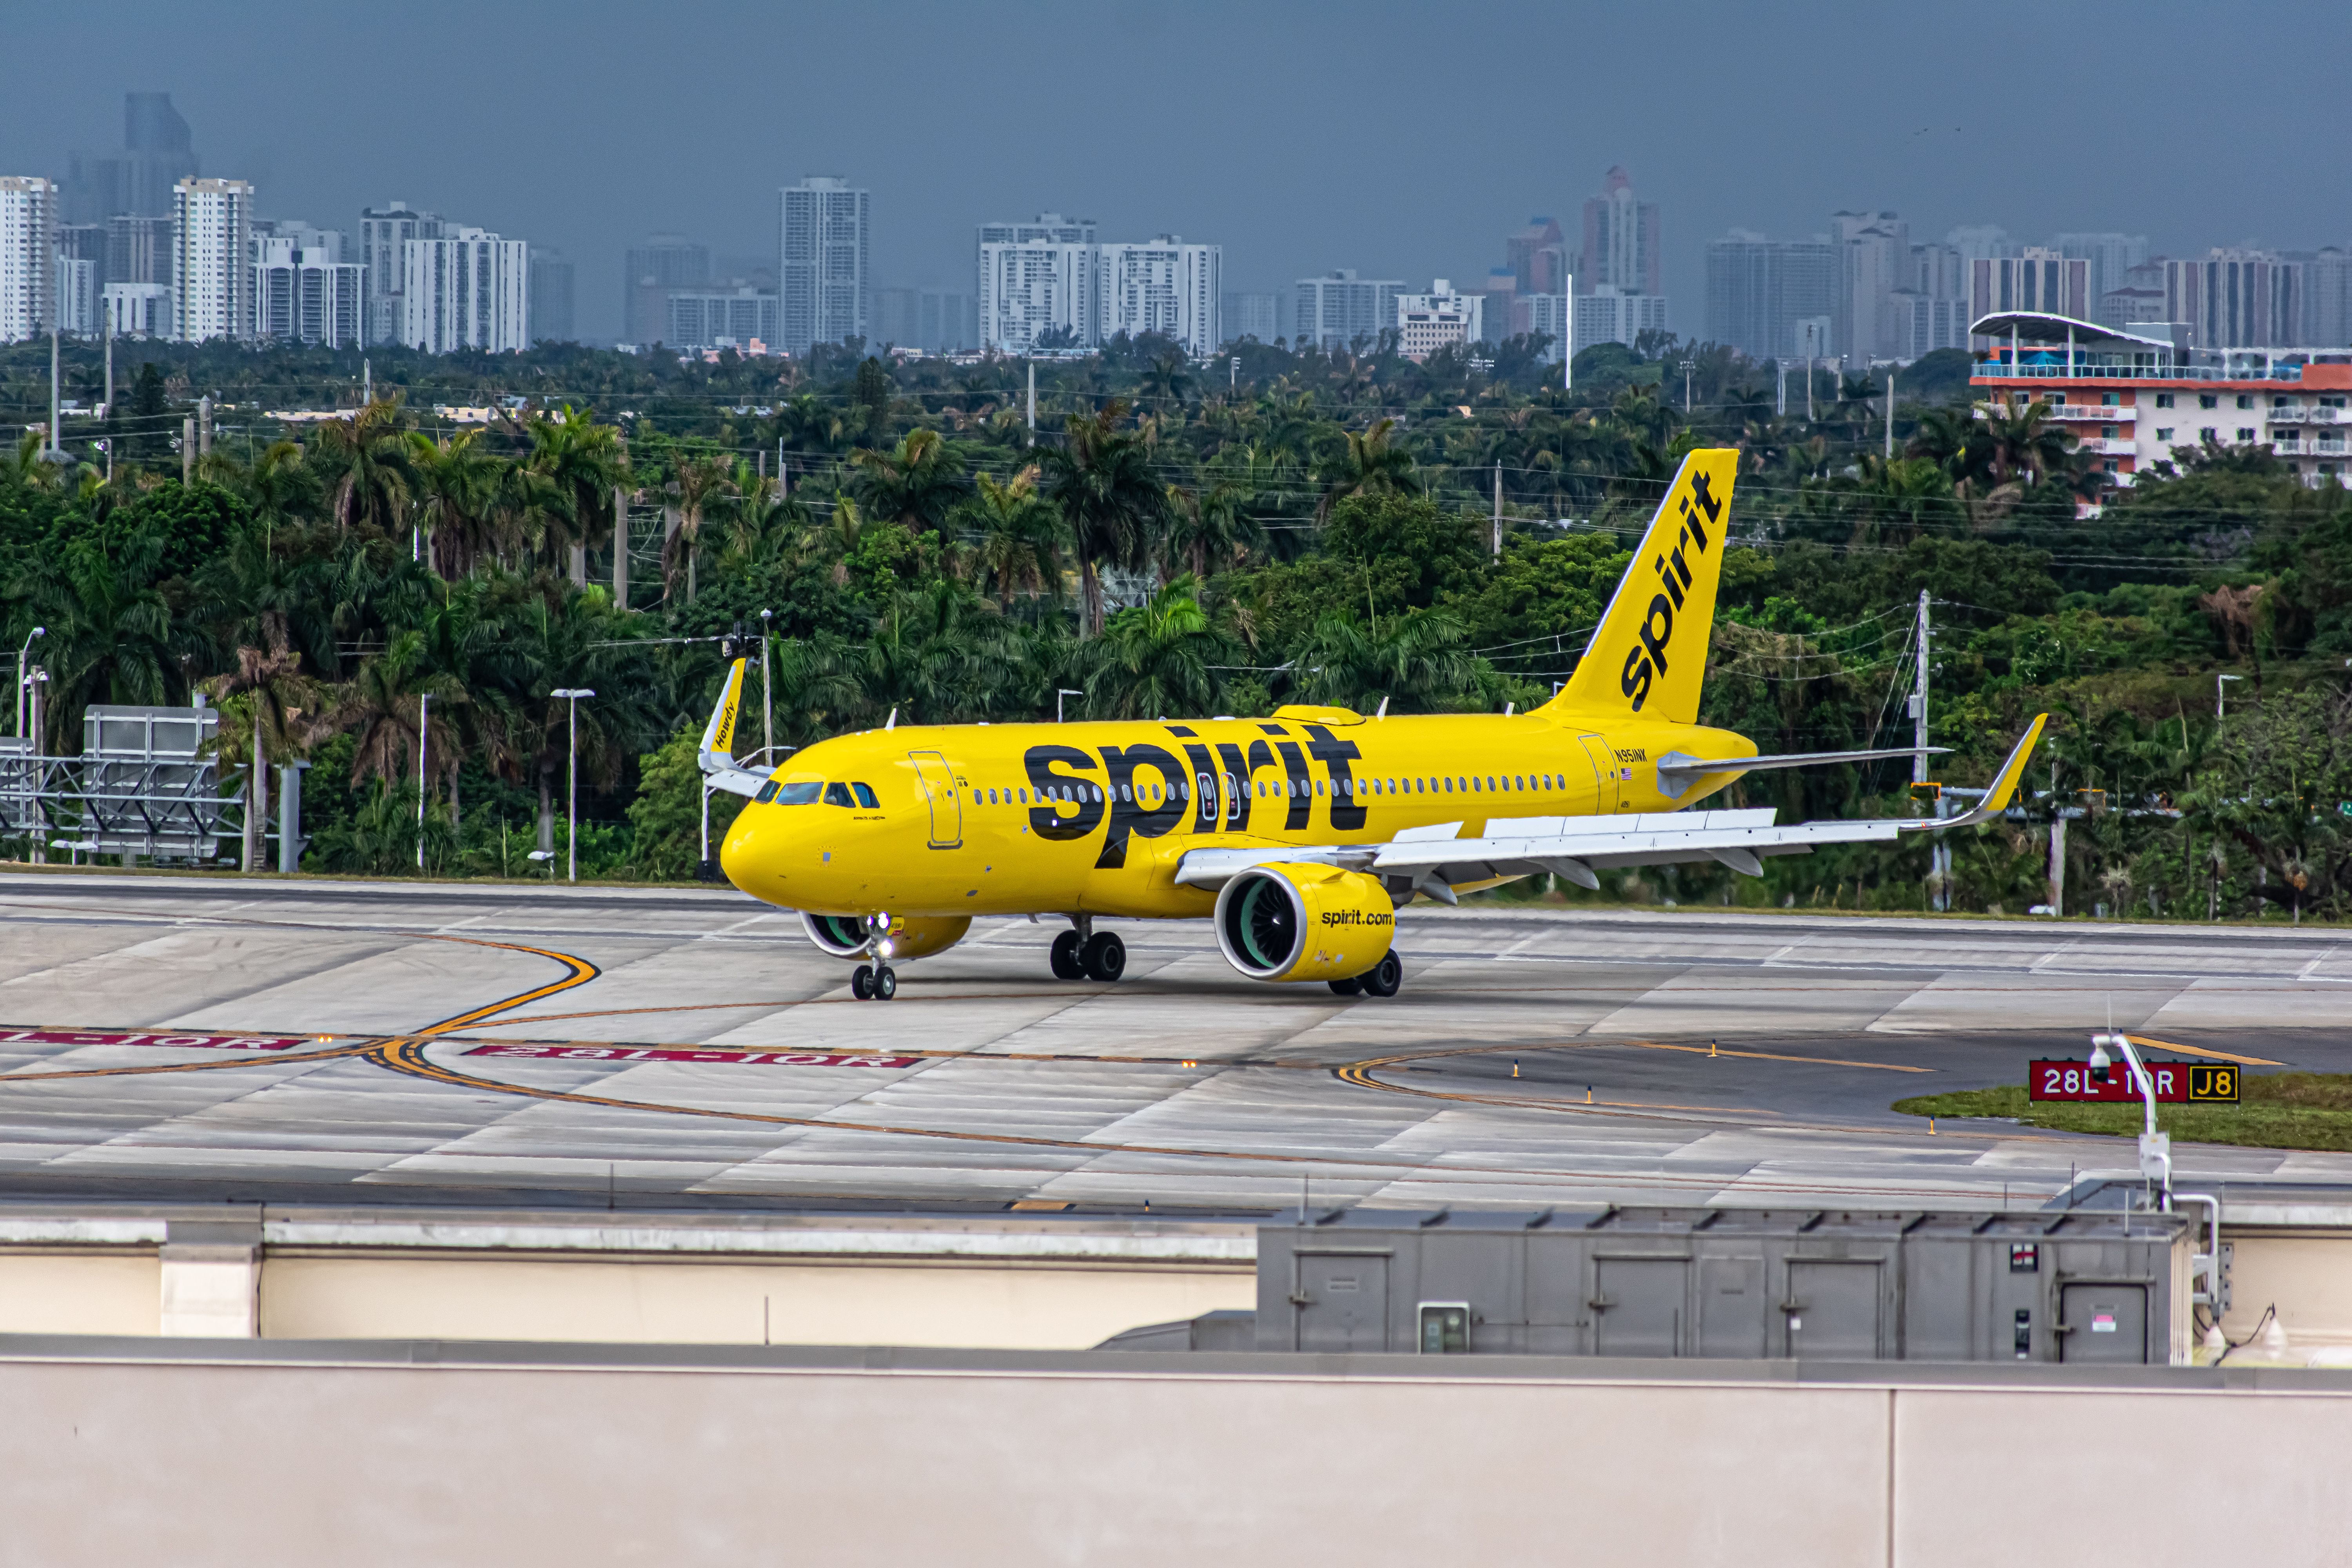 Spirit Airlines Airbus A320neo taxiing at FLL